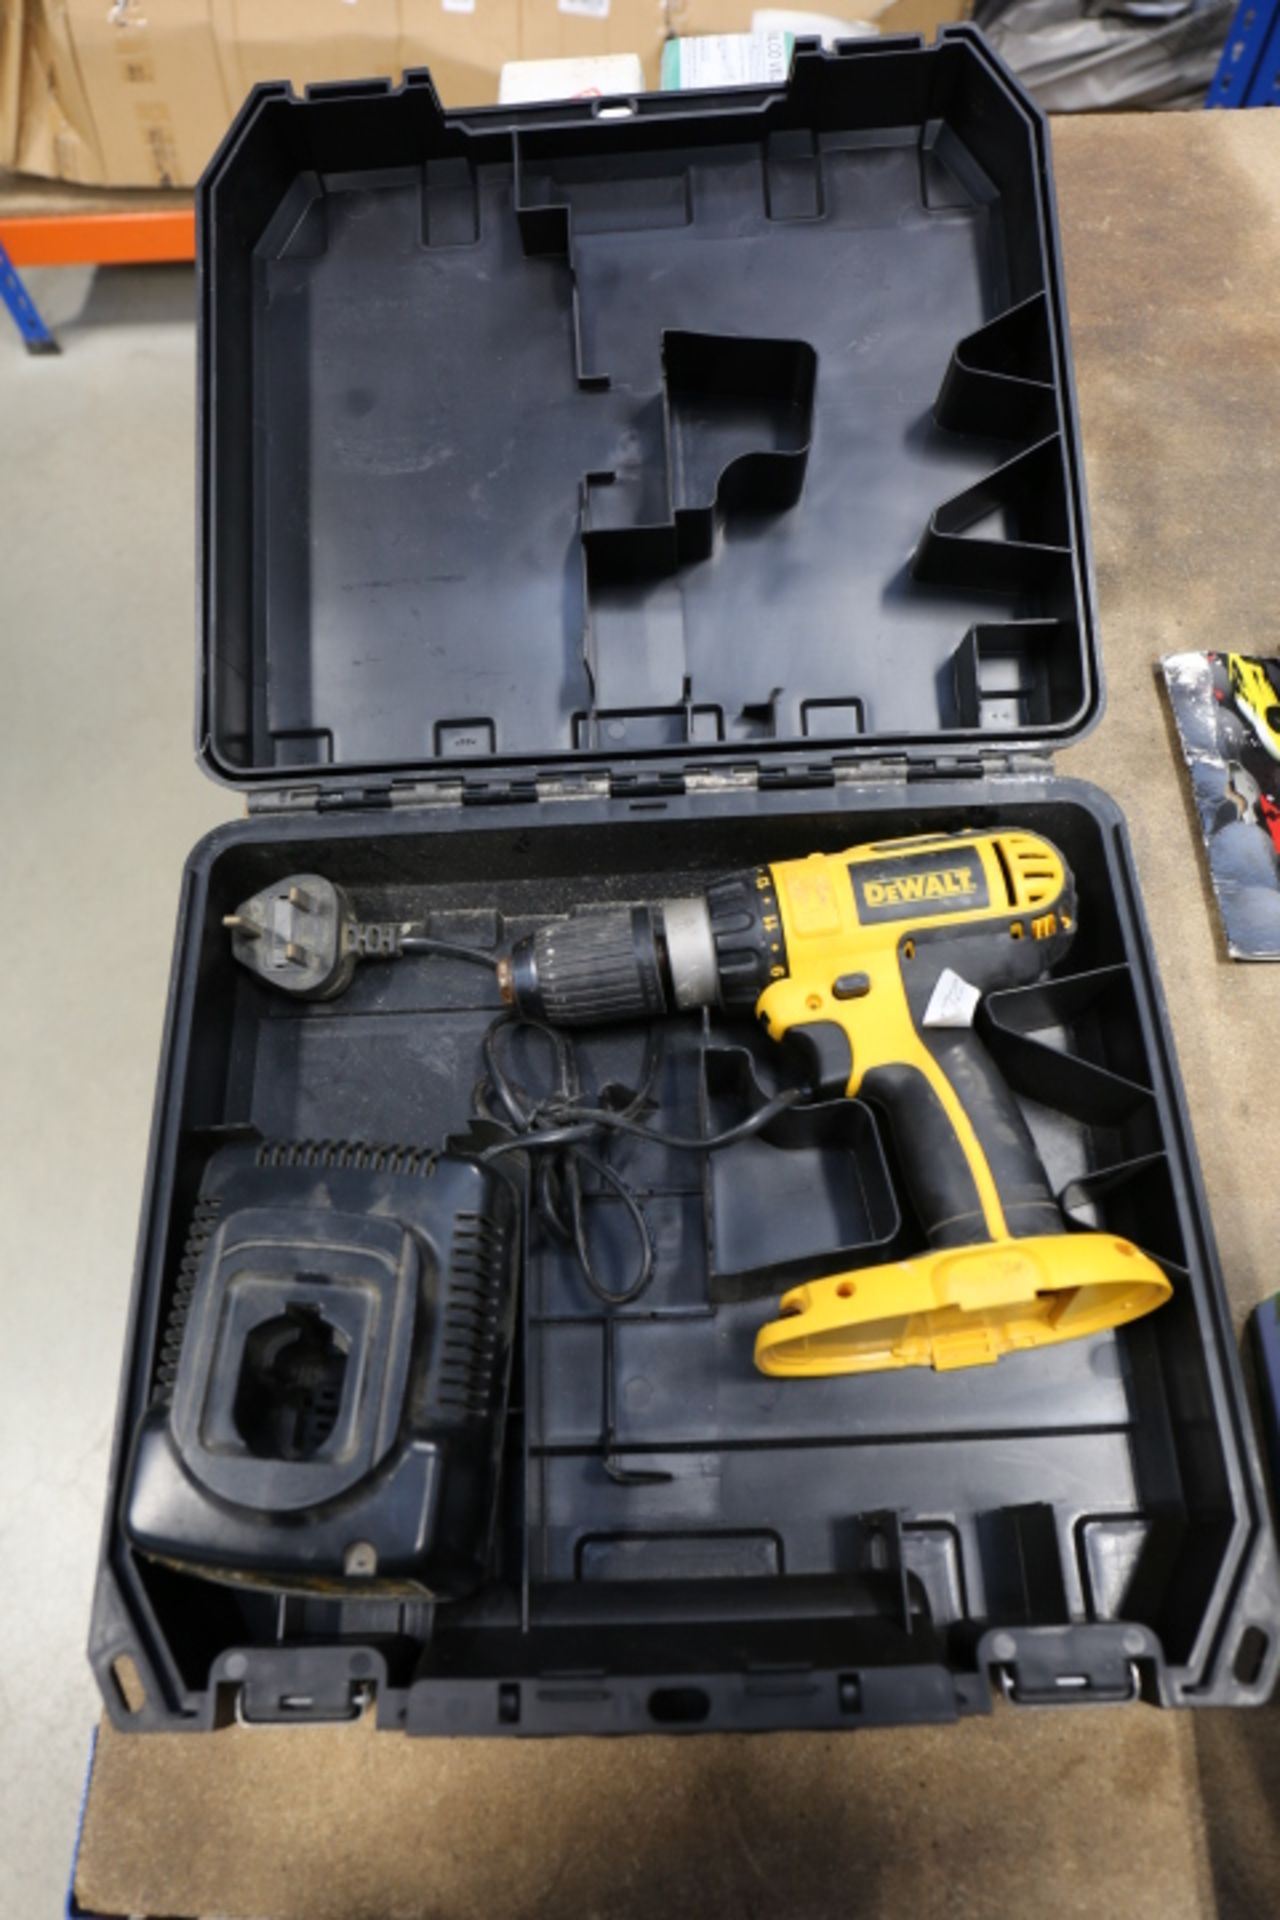 4526 Dewalt battery drill, no battery one charger